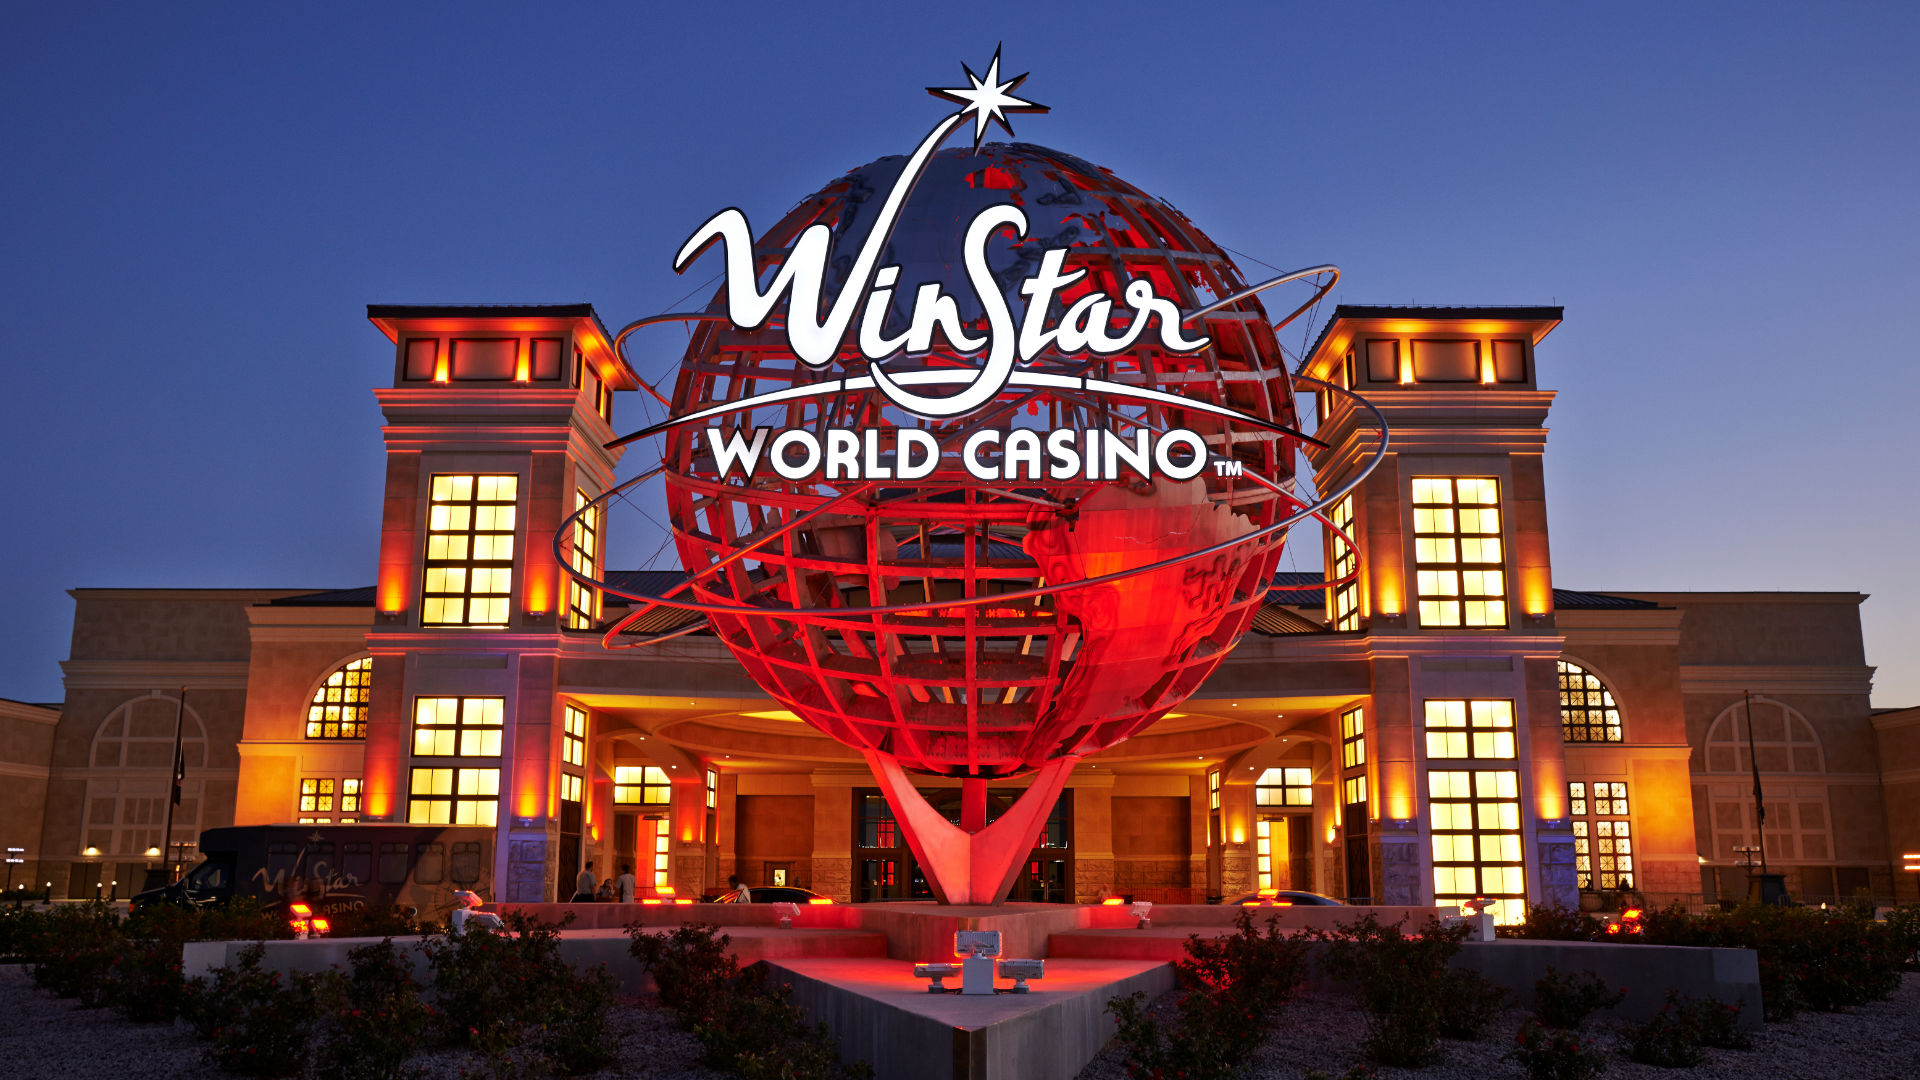 winstar casino hotel reservations phone number